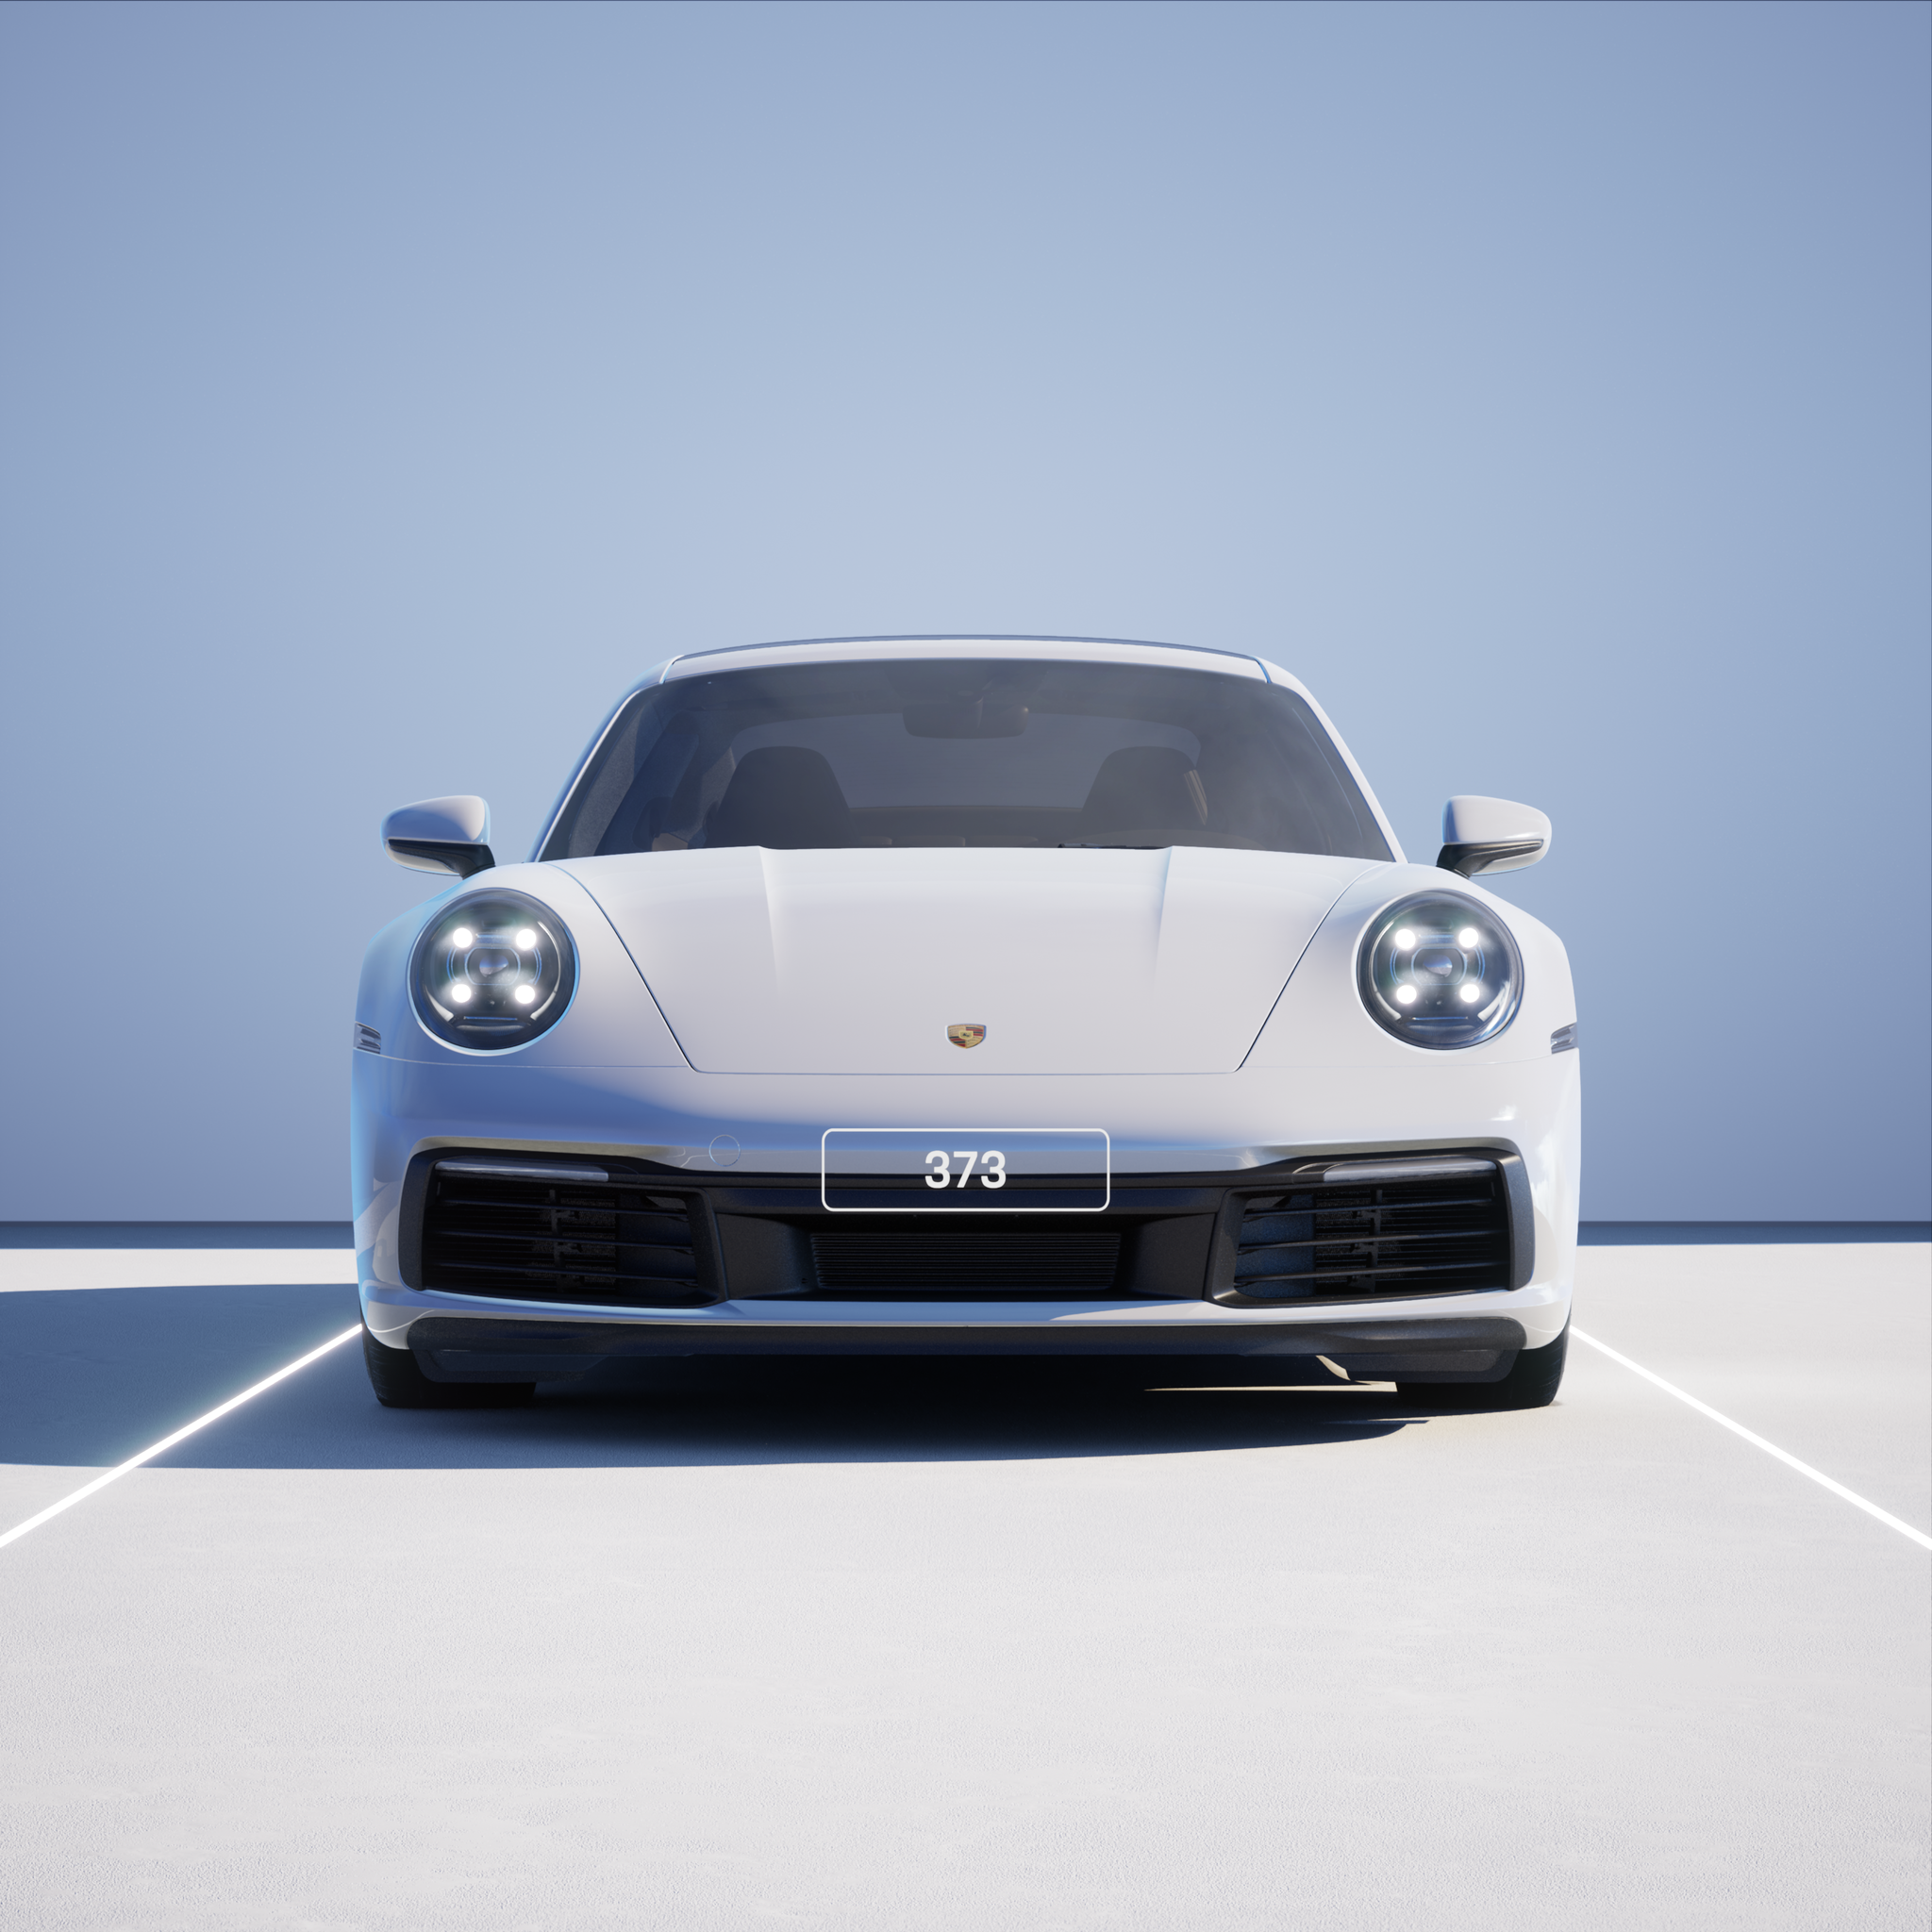 The PORSCHΞ 911 373 image in phase